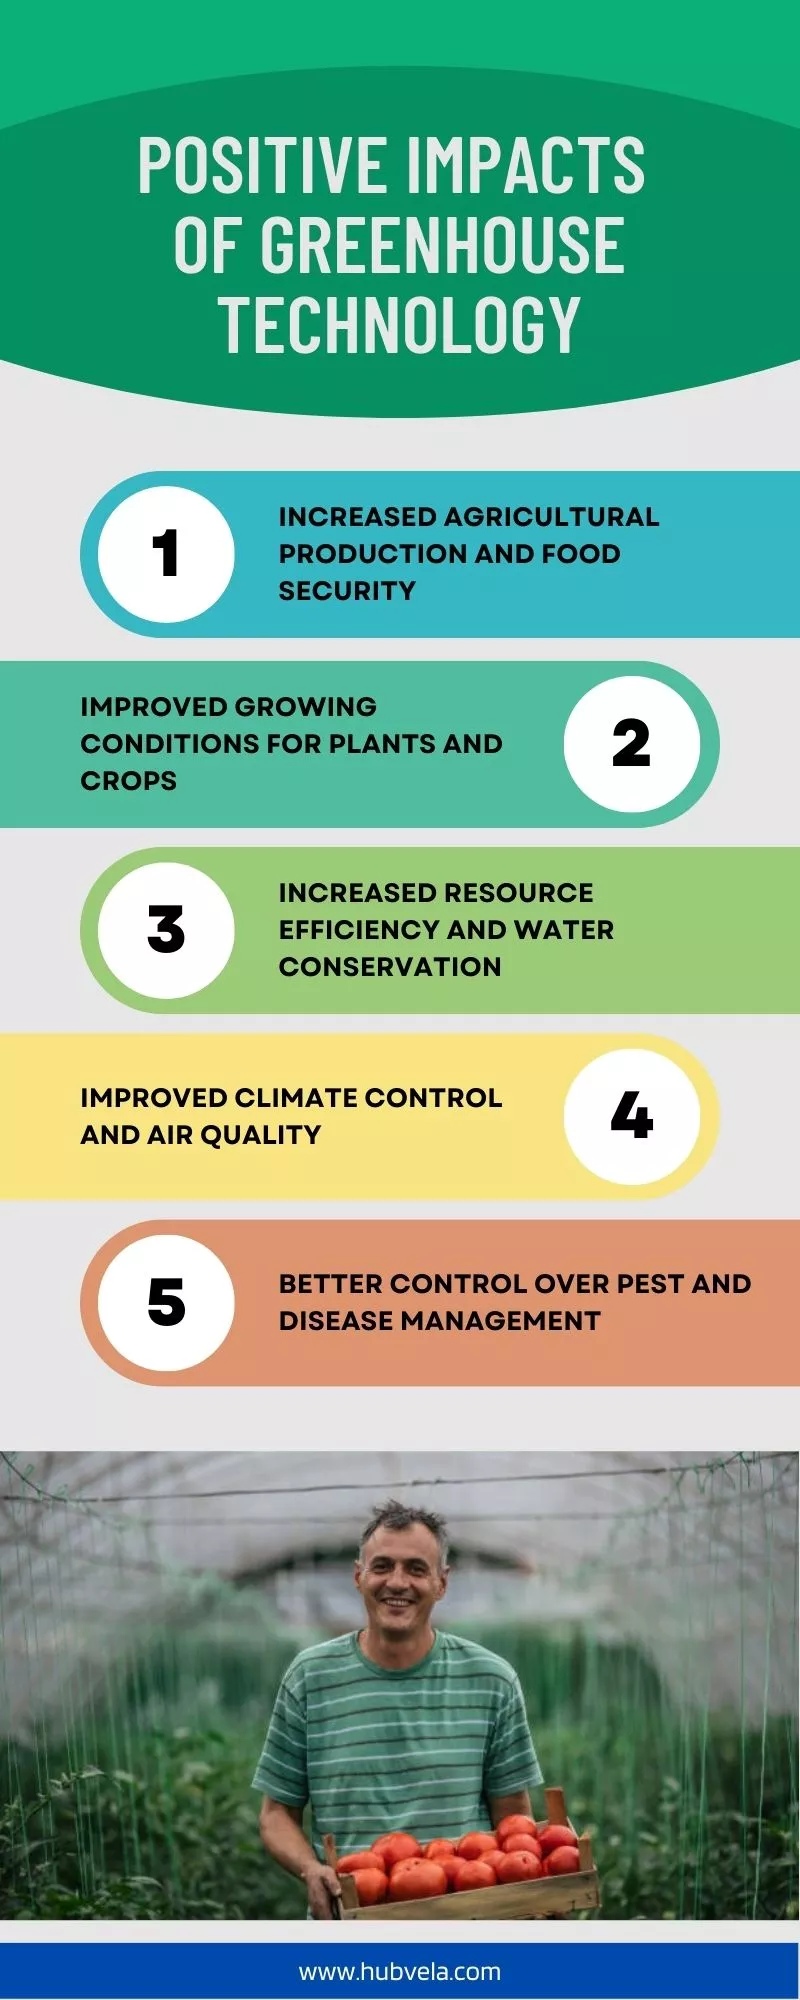 Positive Impacts of Greenhouse Technology infographic